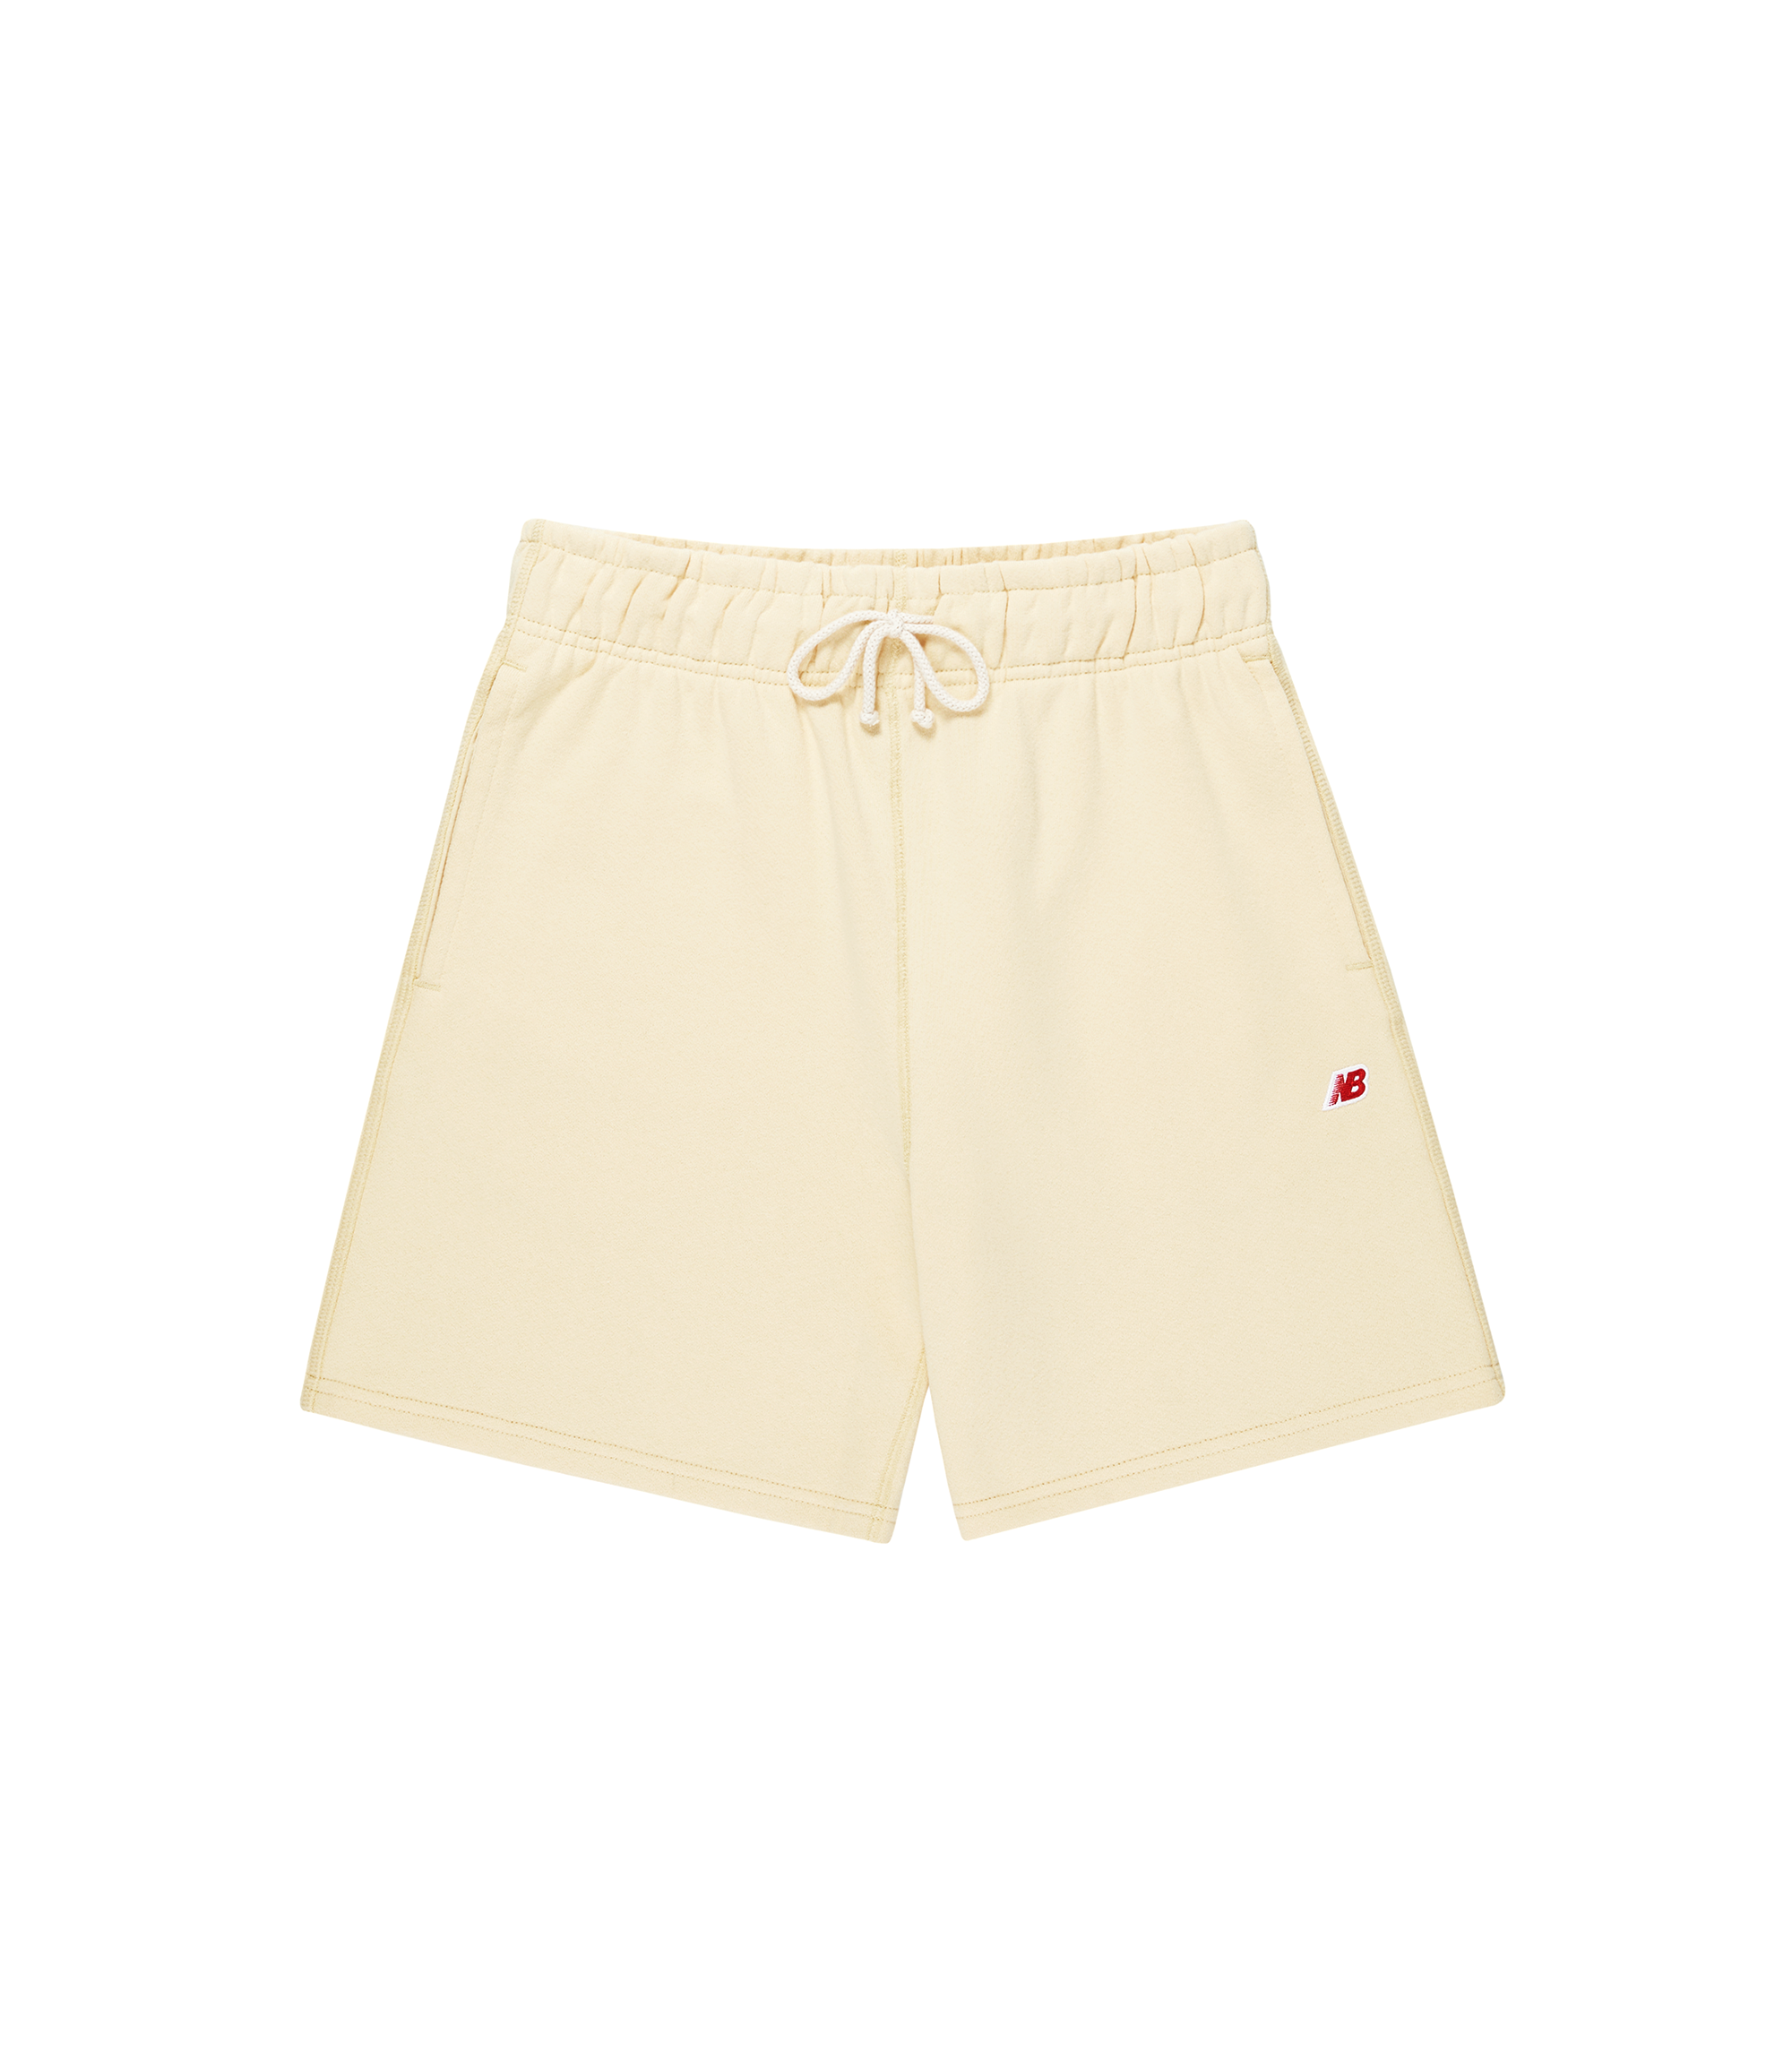 Made in USA Shorts - Sandstone